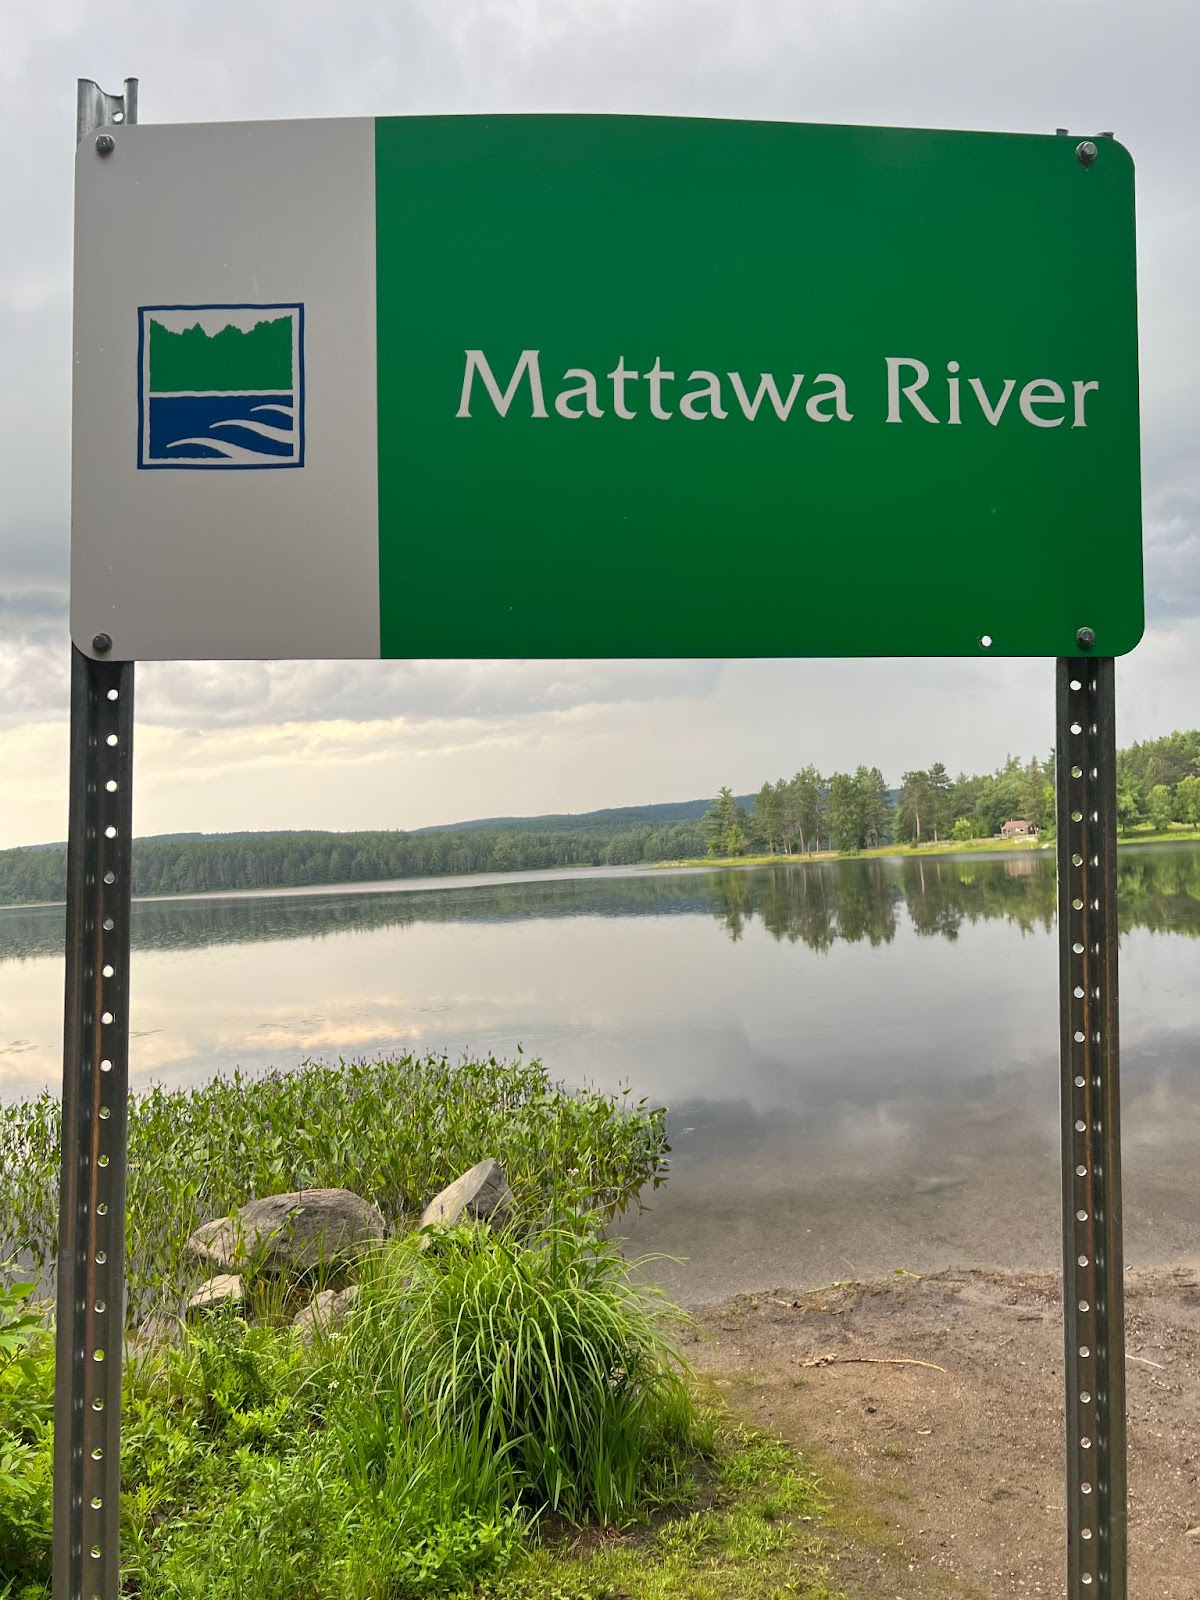 a green and white Ontario Parks sign that reads "Mattawa River", in front of a wide, glassy river with thick green forest on the distant bank.